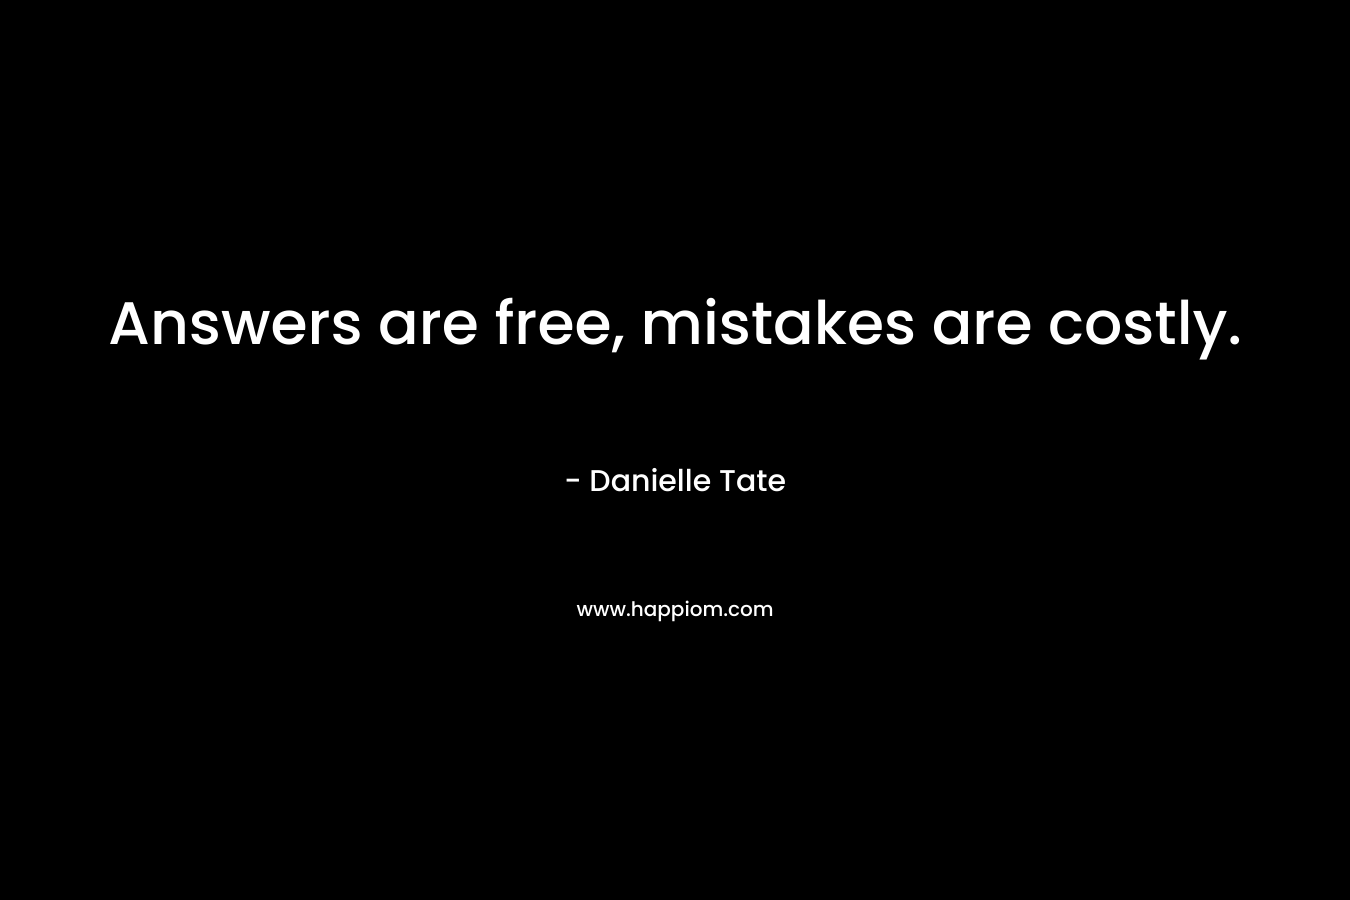 Answers are free, mistakes are costly.